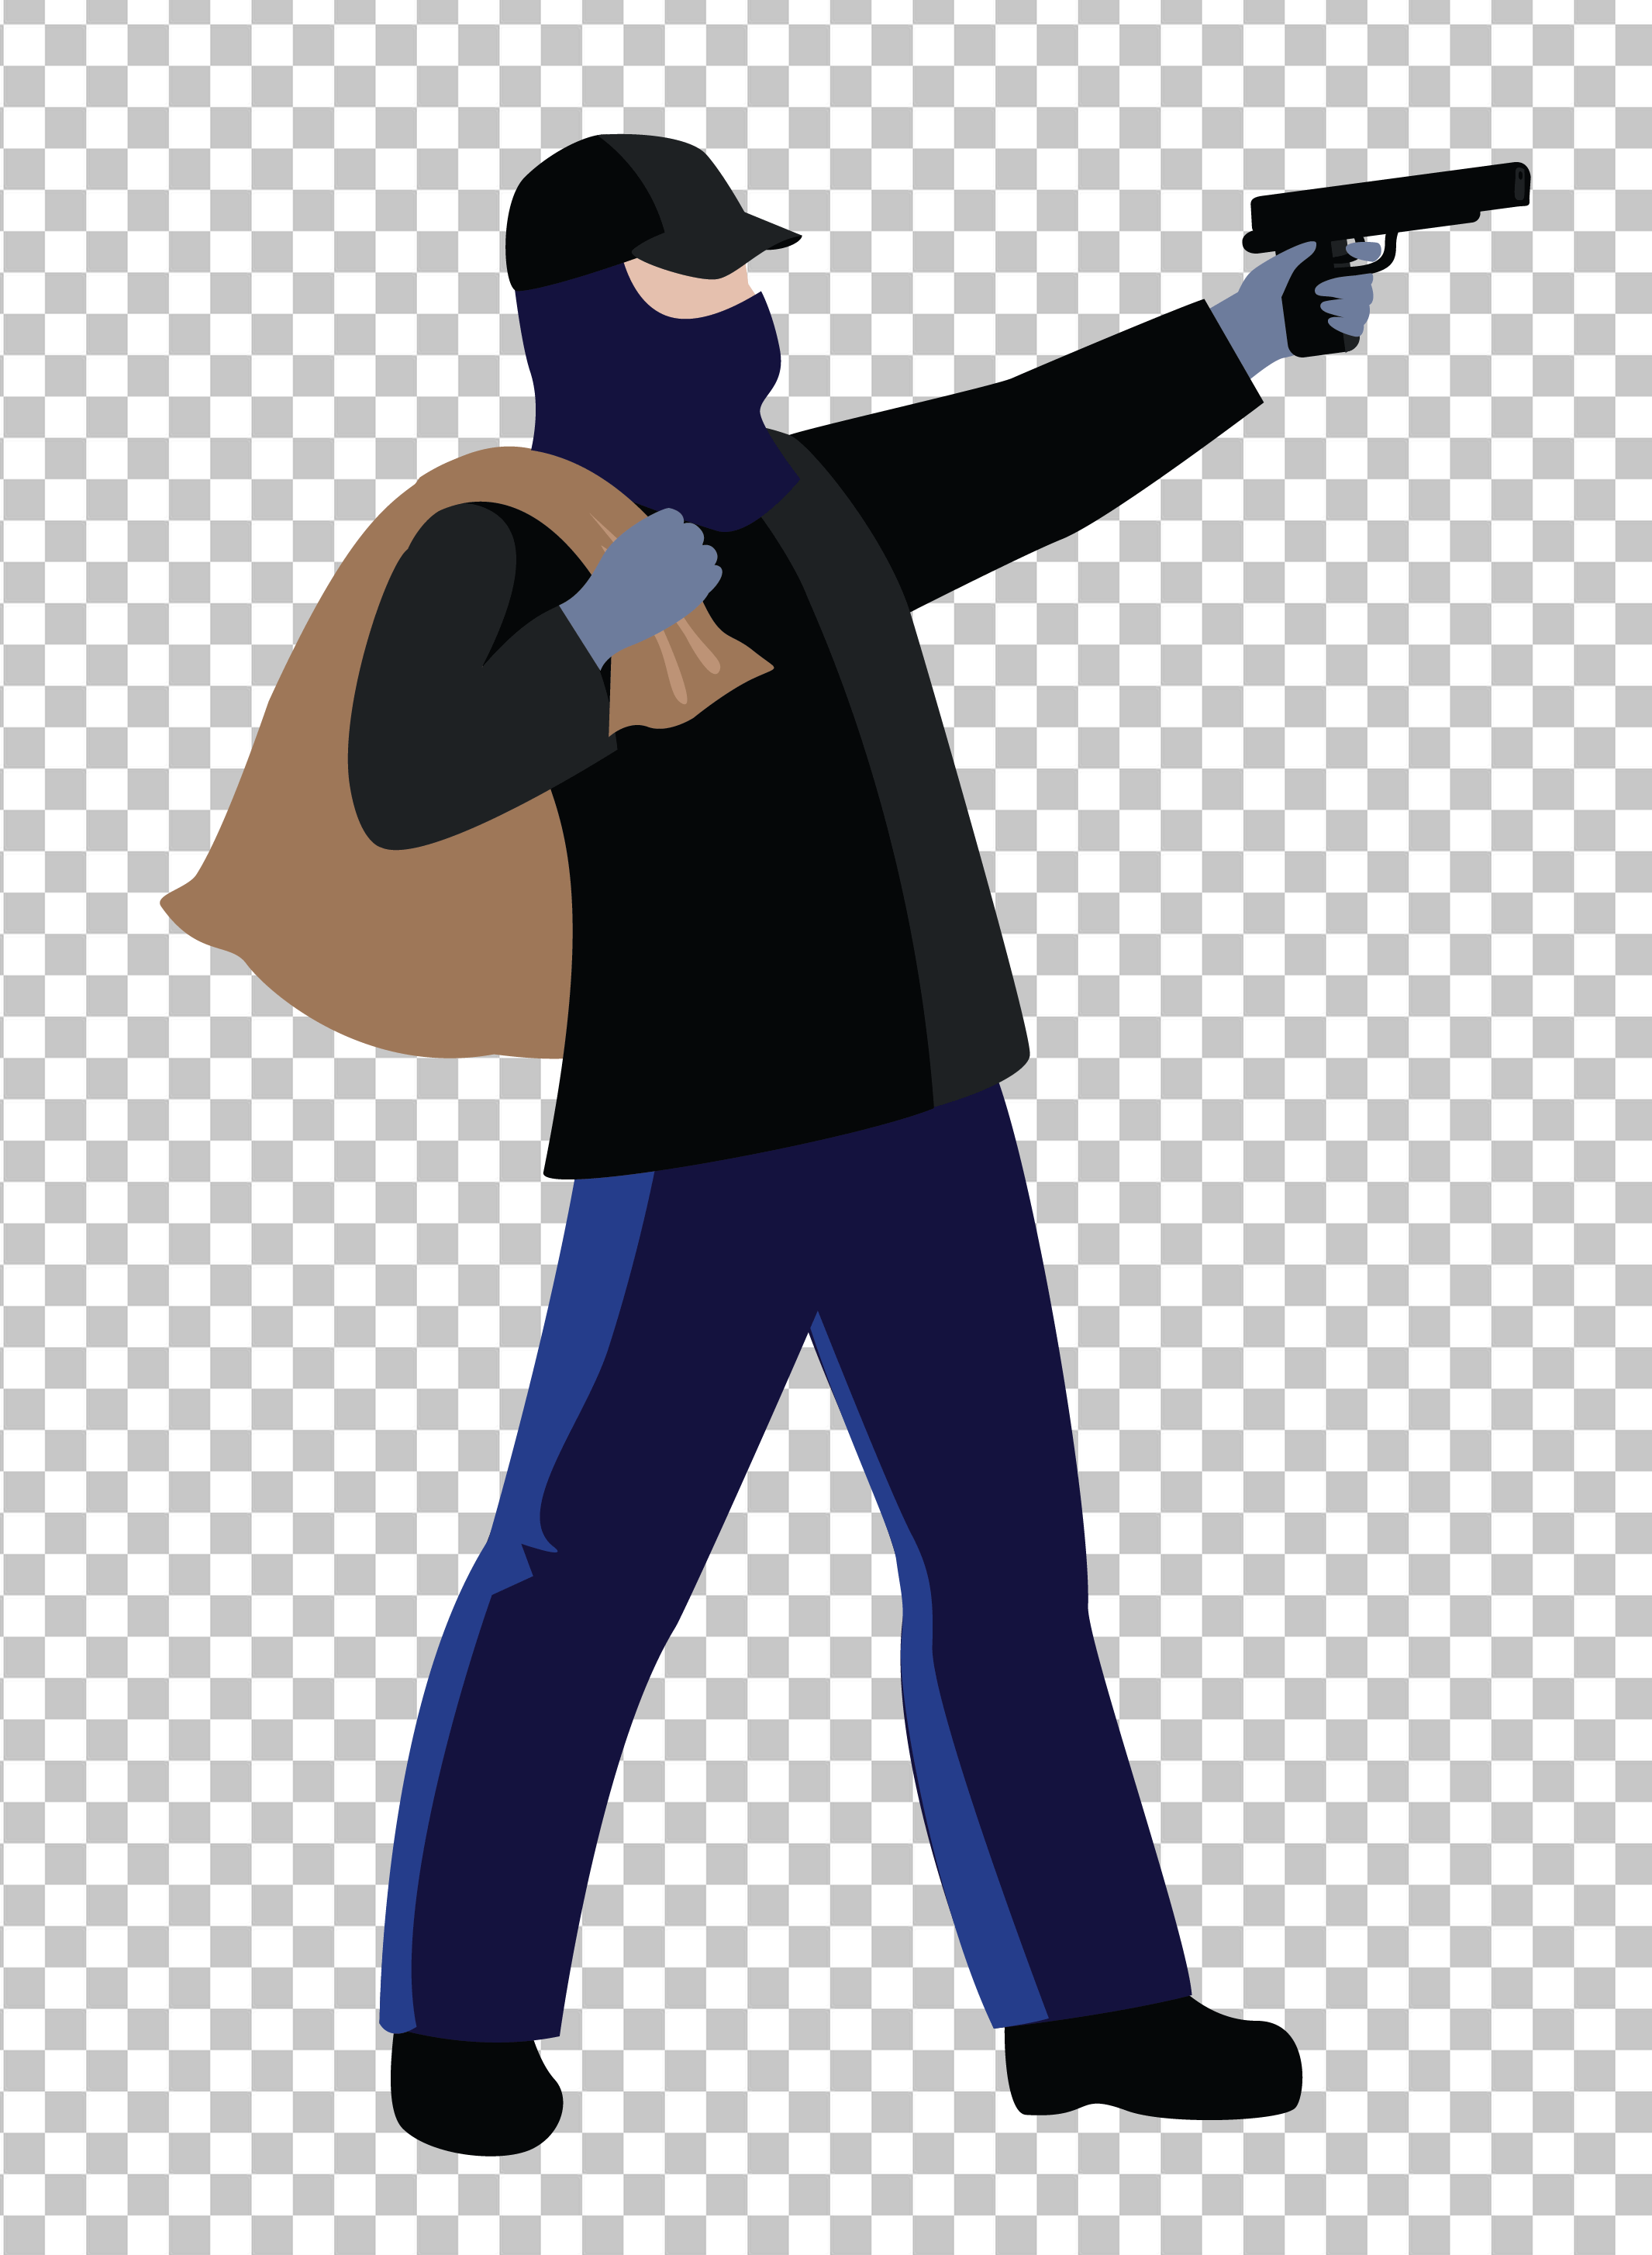 Robber wearing a mask pointing gun PNG image